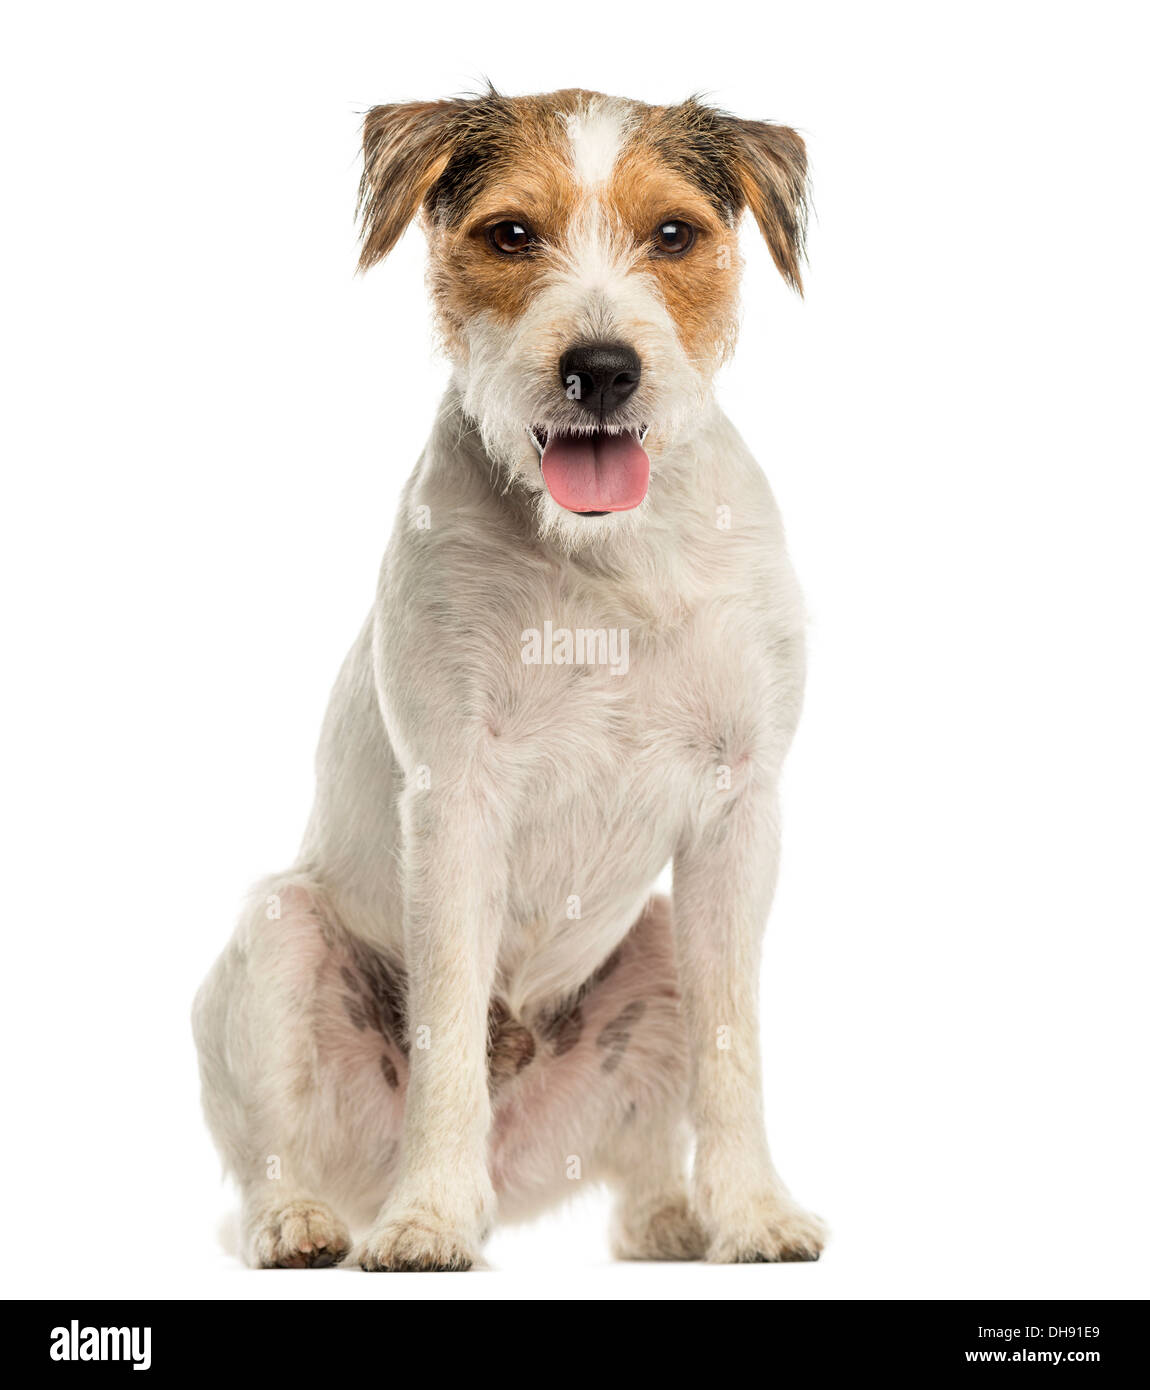 Parson Russel Terrier sitting, looking at the camera, panting against white background Stock Photo